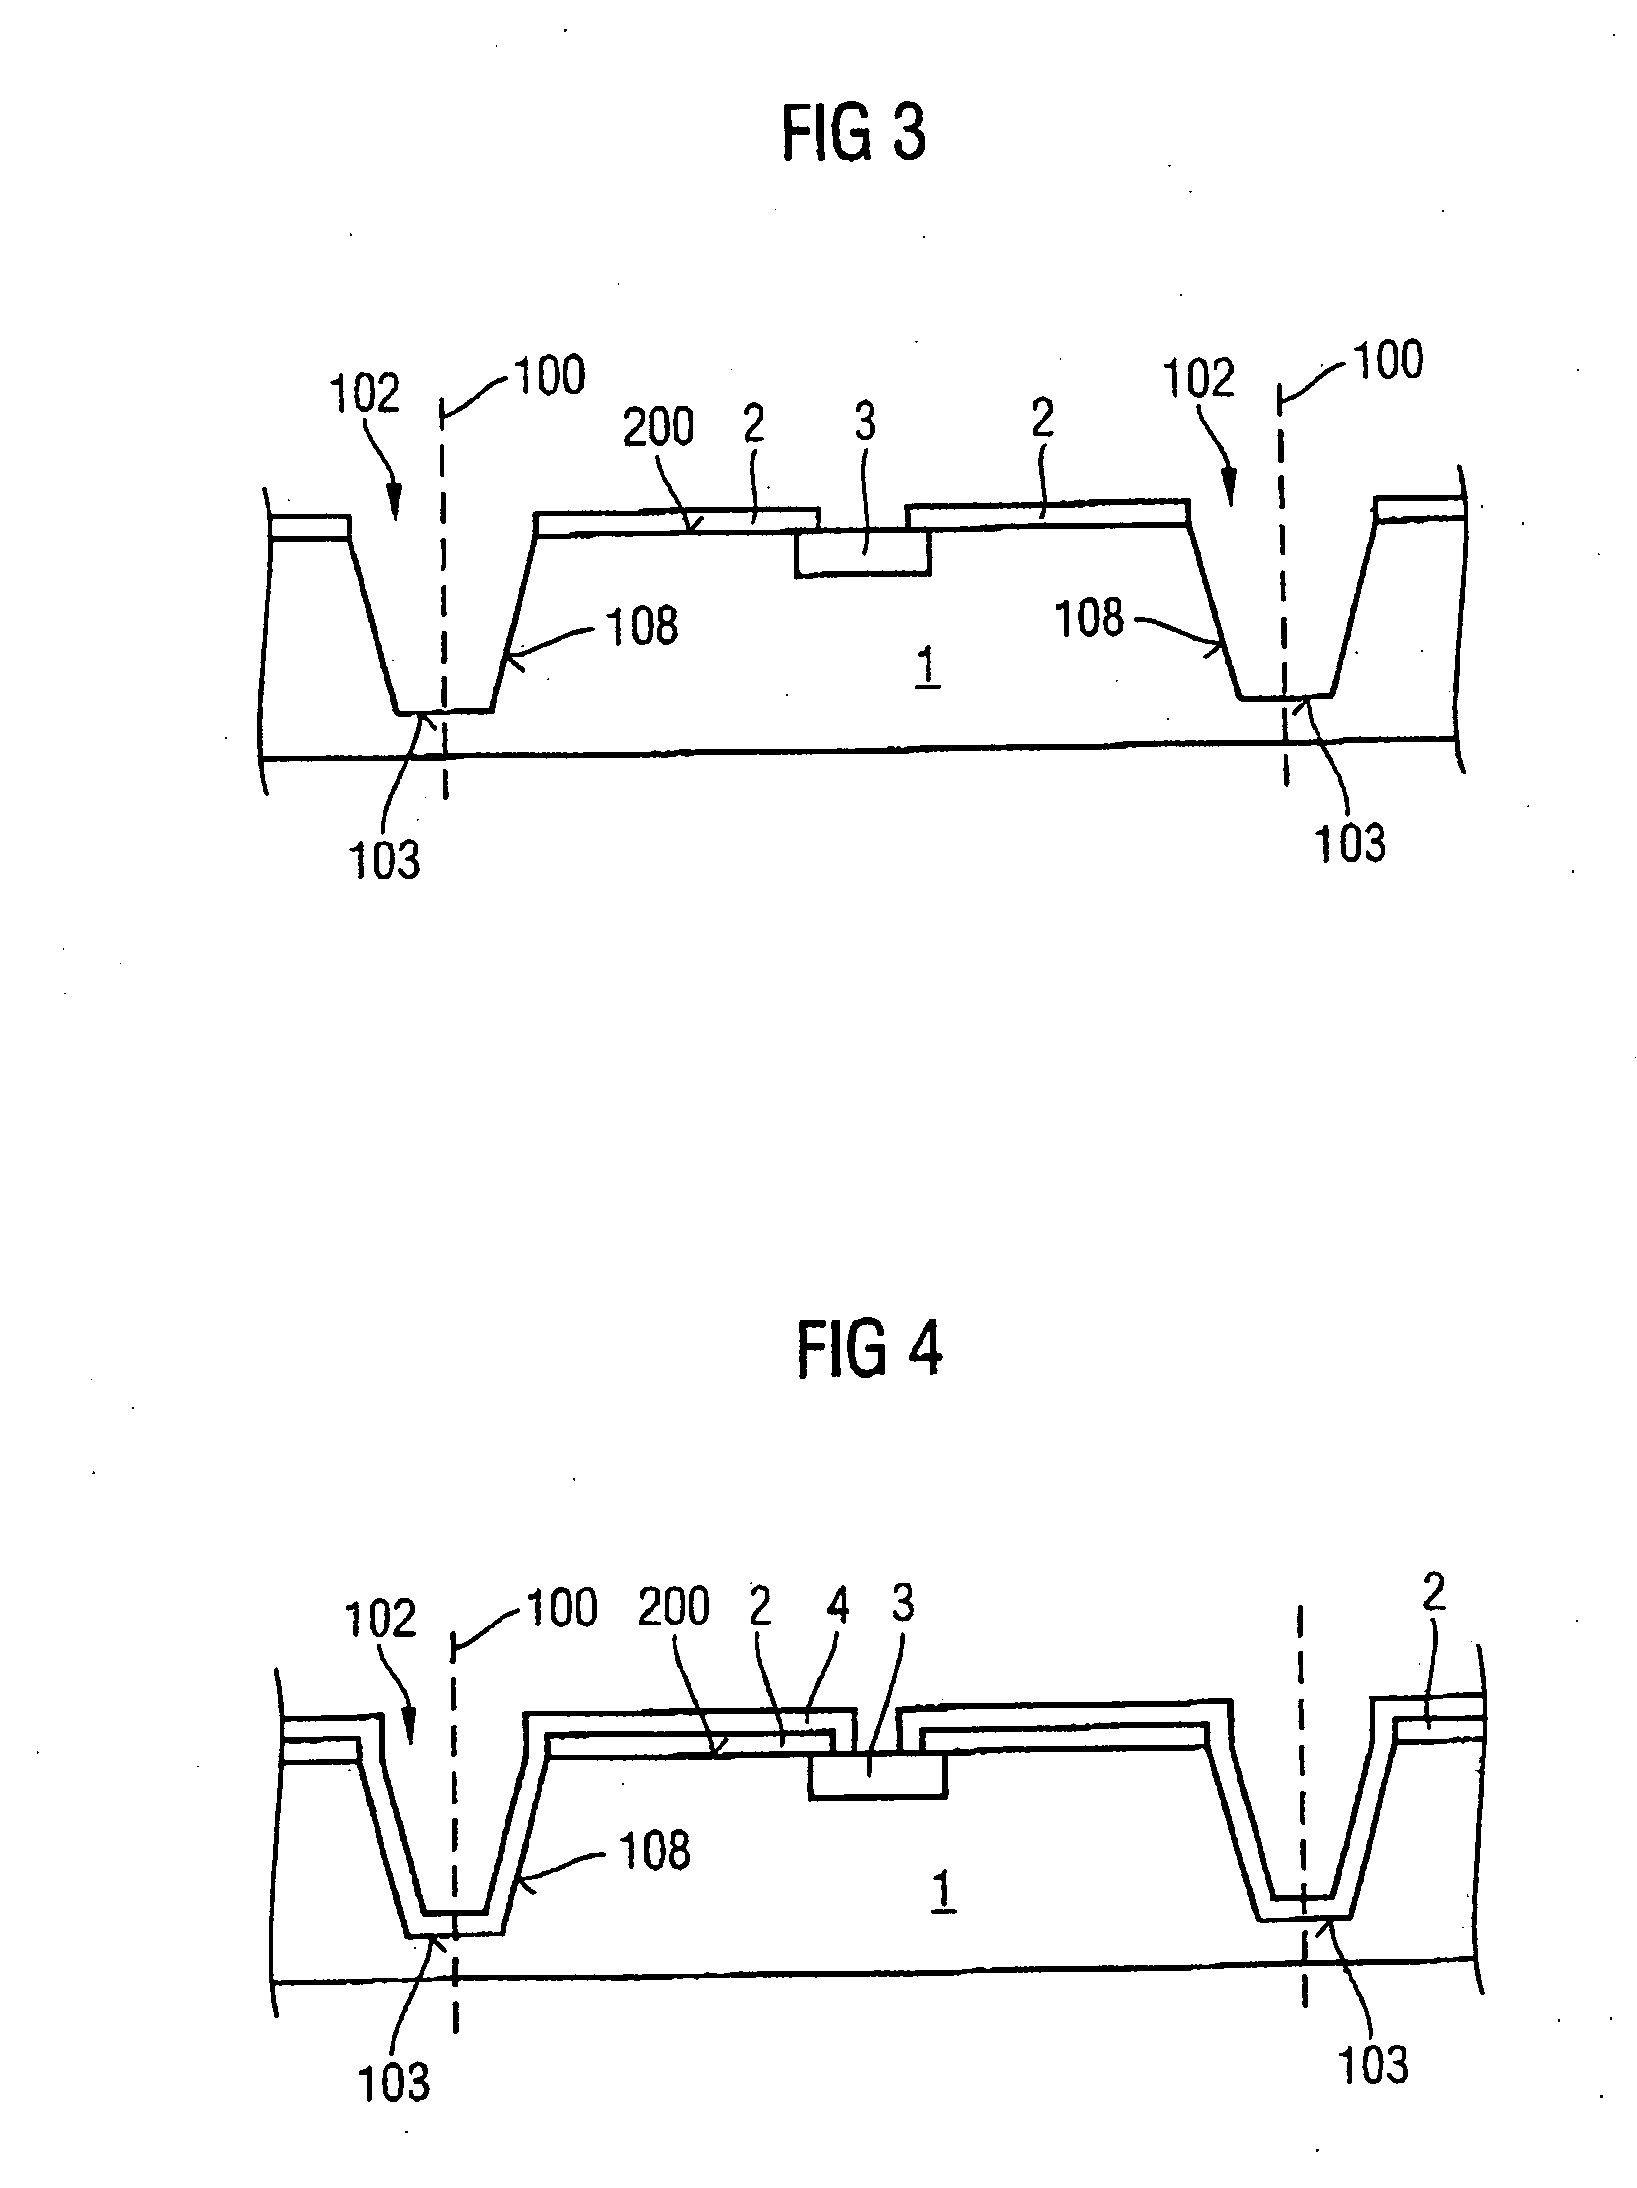 Method for fabricating semiconductor components